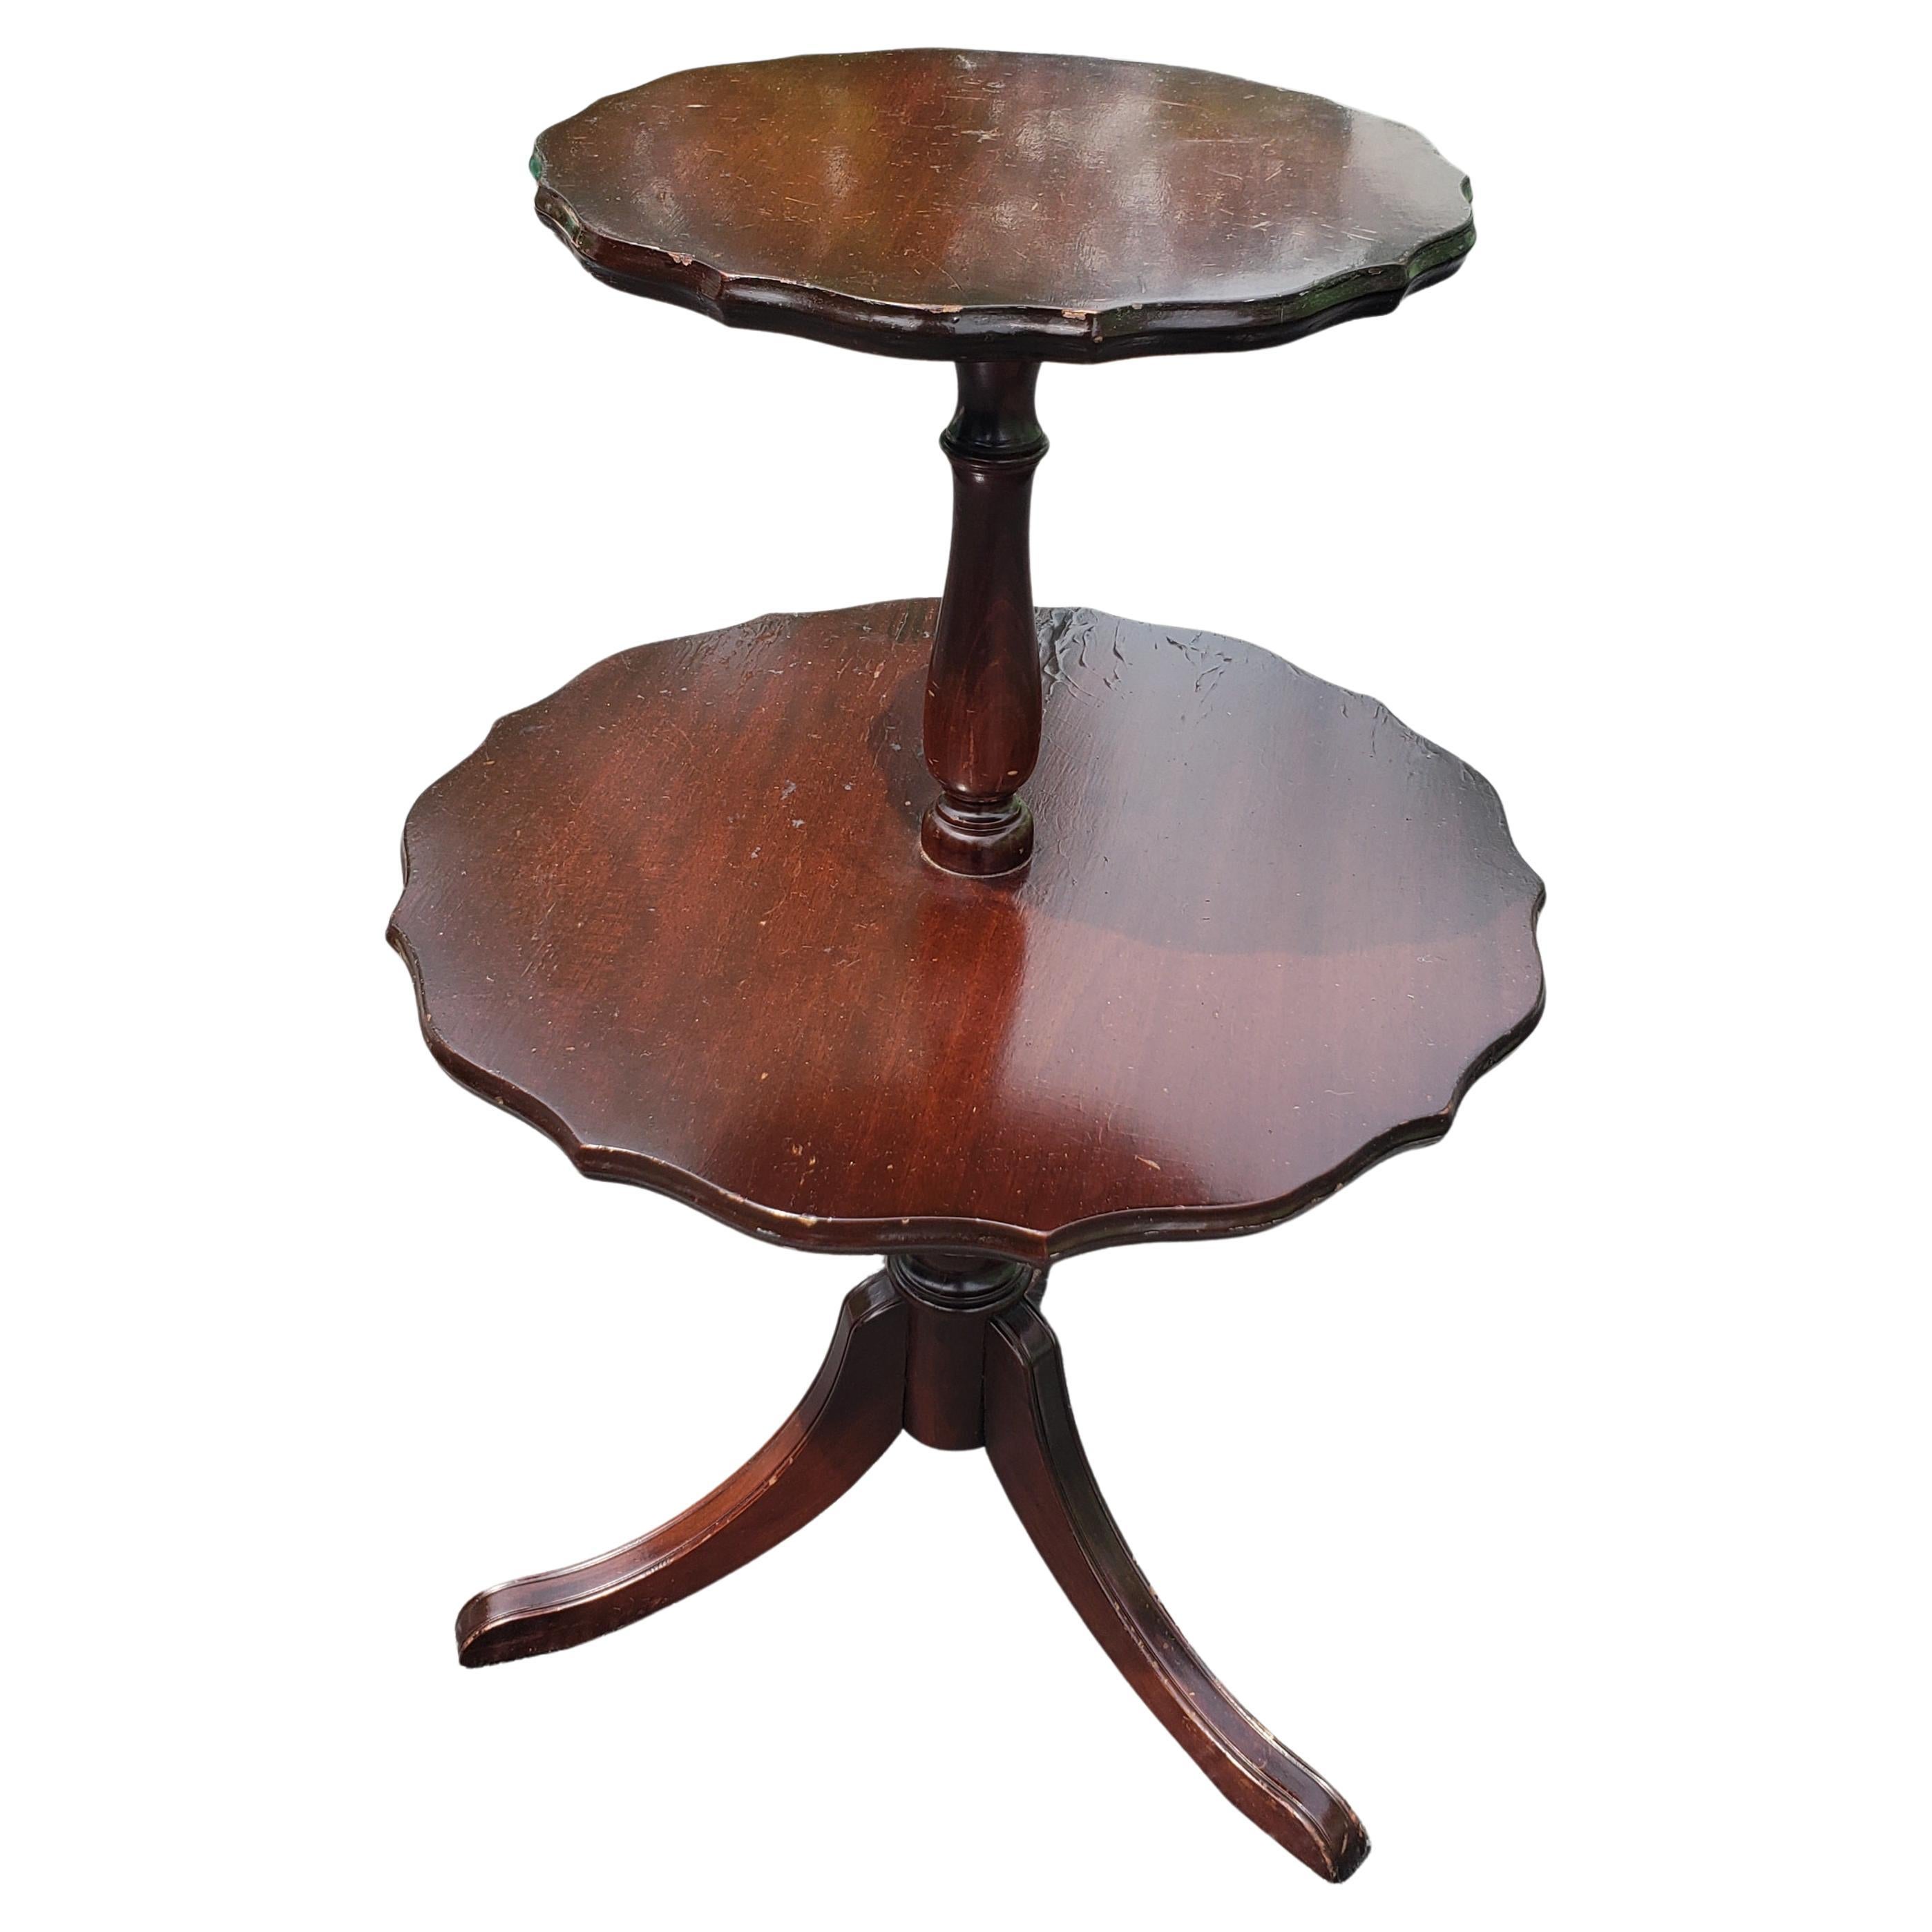 Early 20th century mahogany two-tier dumbwaiter desert table. Table measures 28